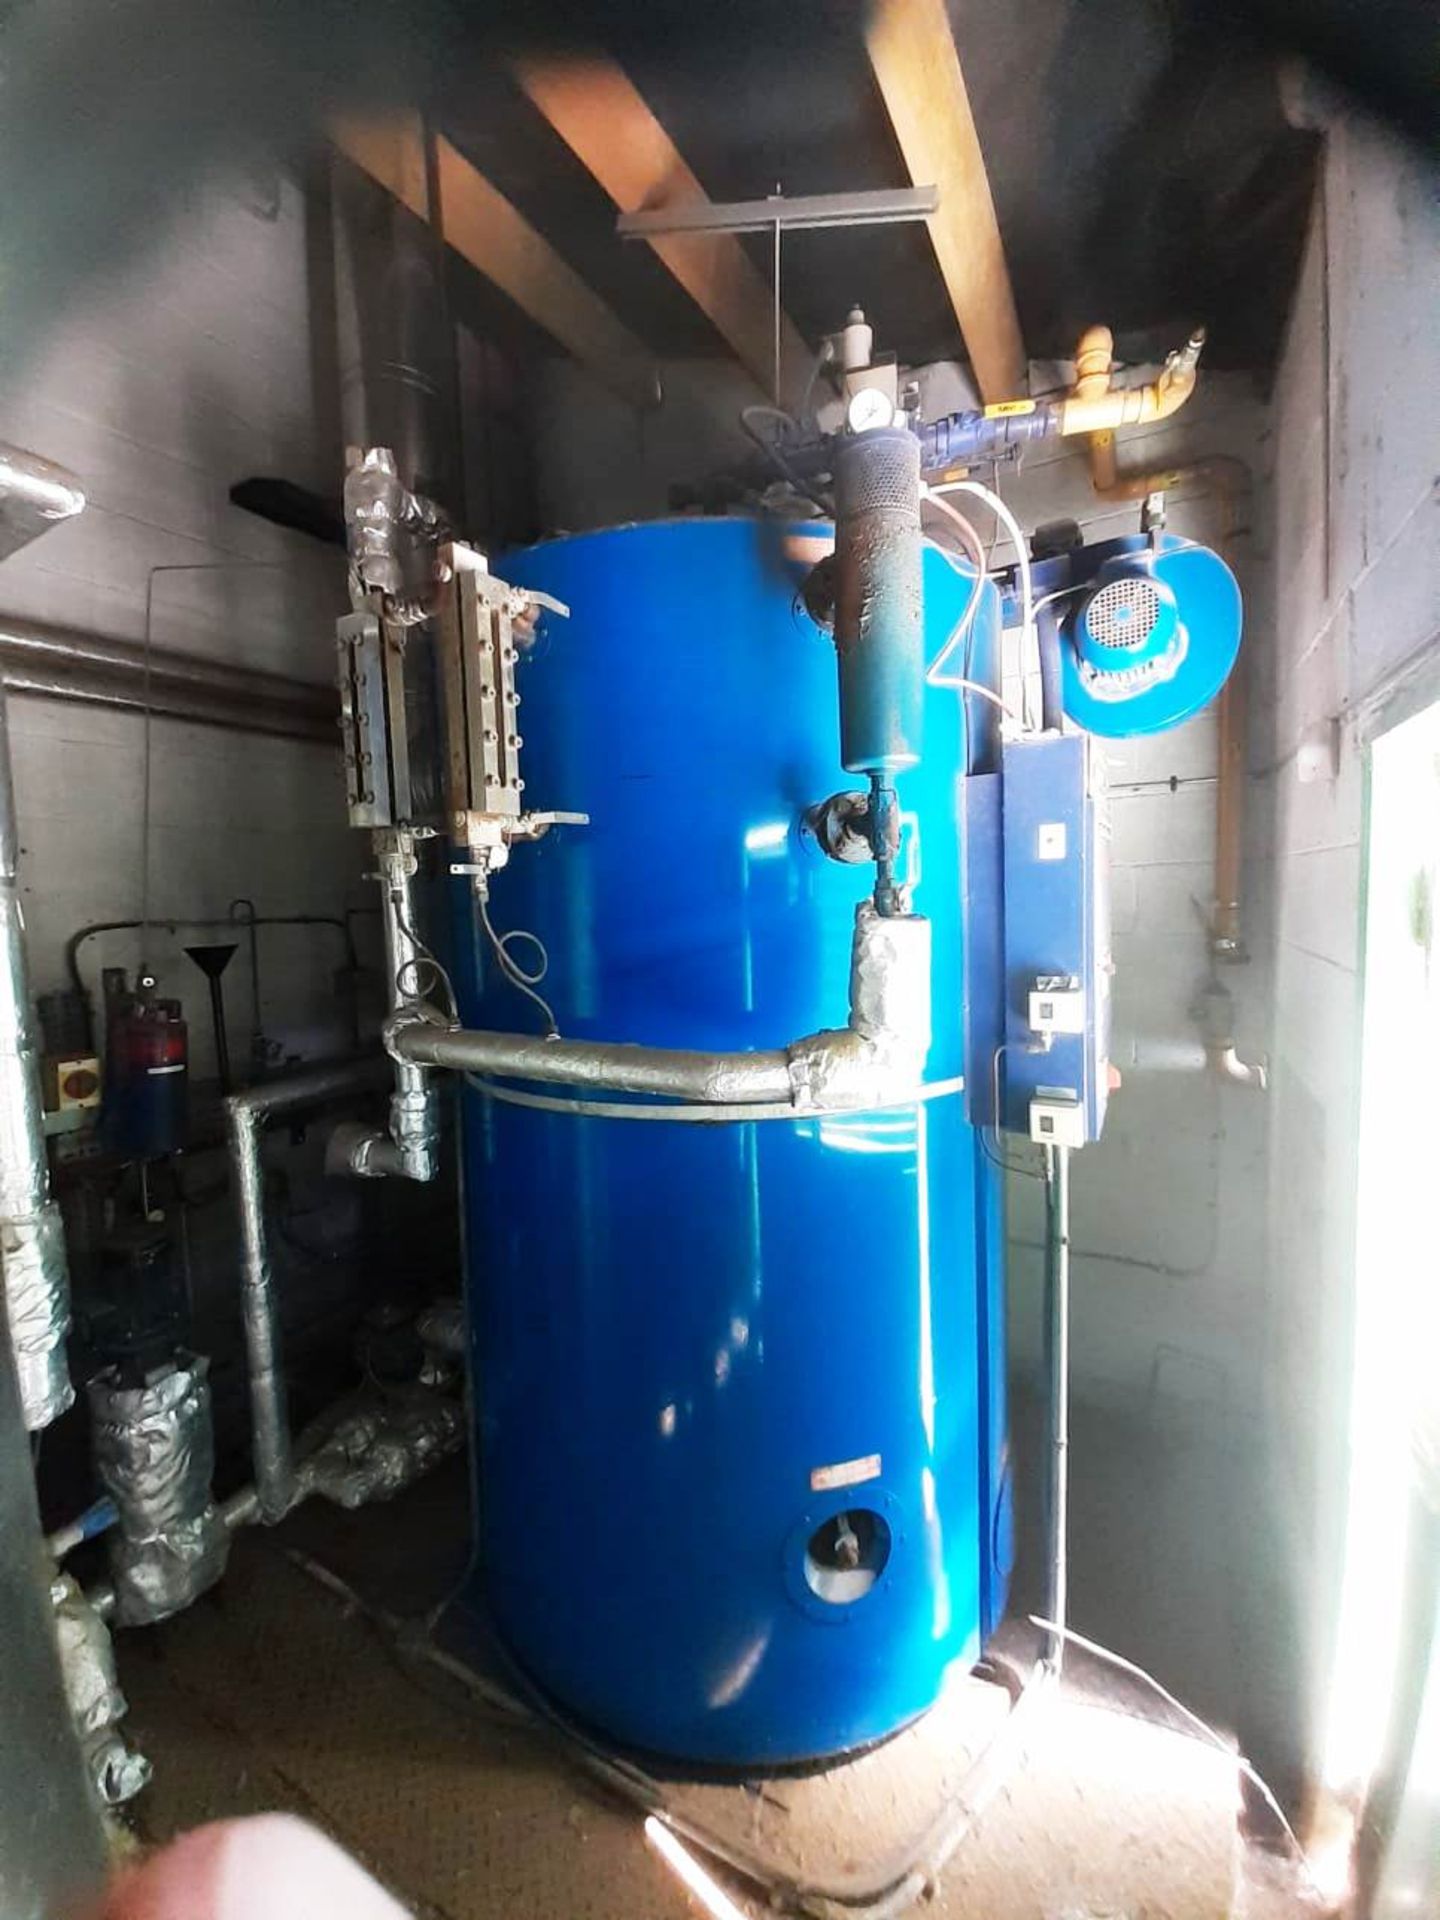 Fulton 60J gas operated steam boiler system, serial no: F1011924B/25 (2008), max rating 60kw, Fulton